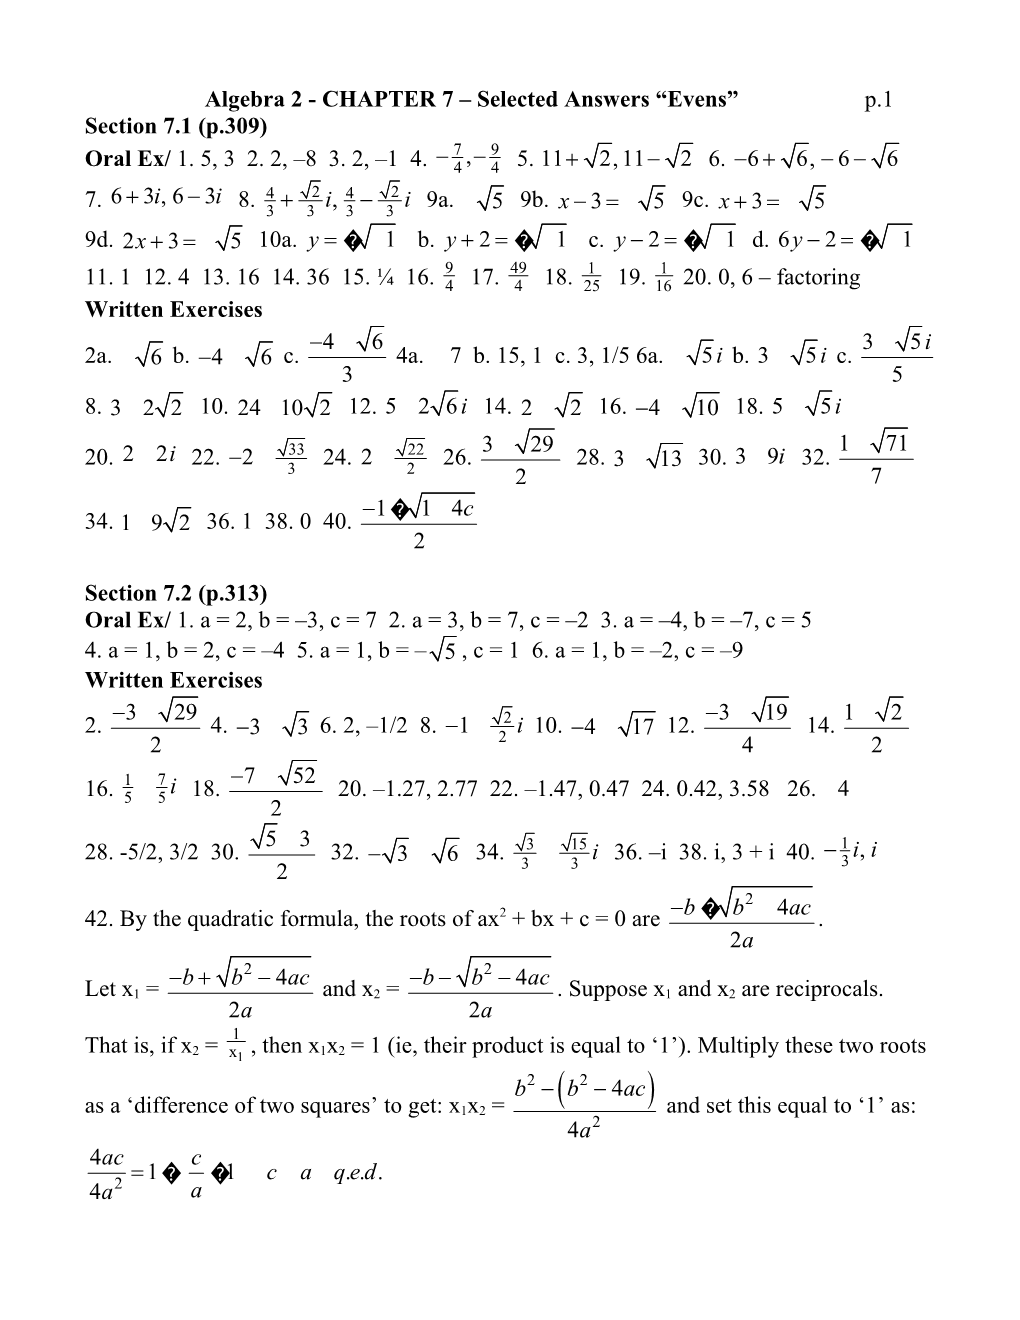 CHAPTER 7 Selected Answers Evens